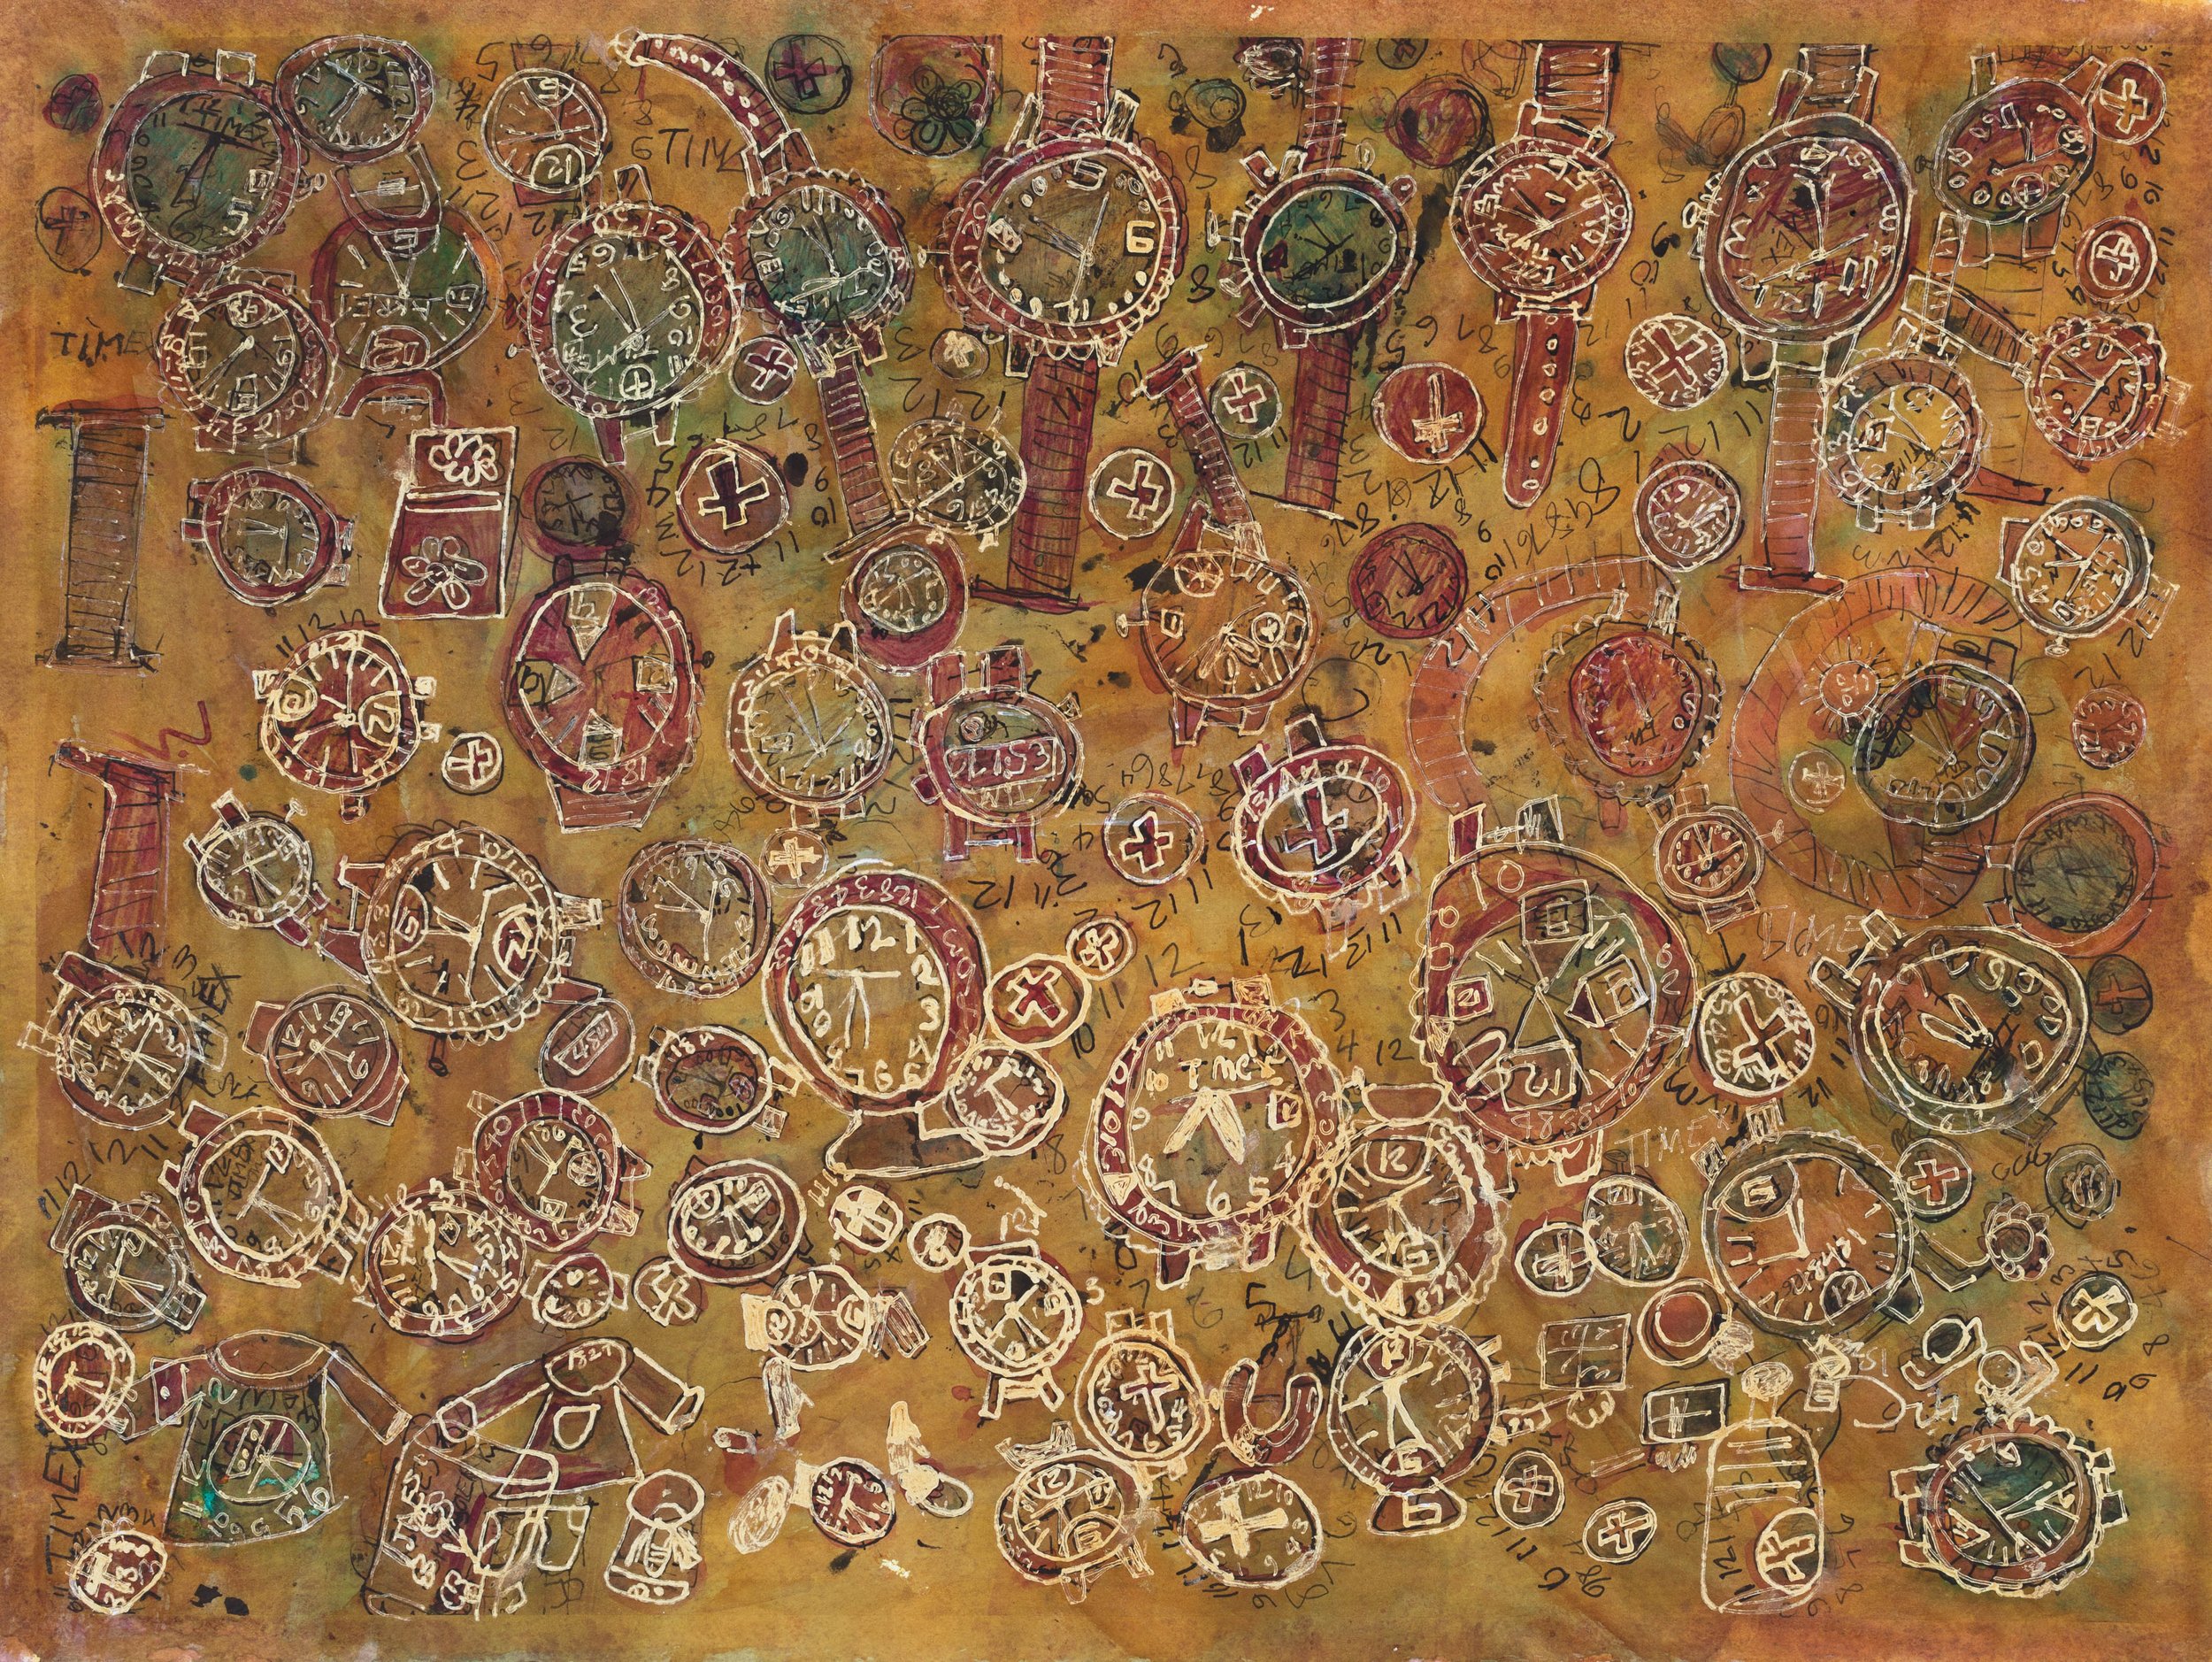 Ochre Time by James Montgomery, 2006, mixed media on paper, 22.5 x 30 inches